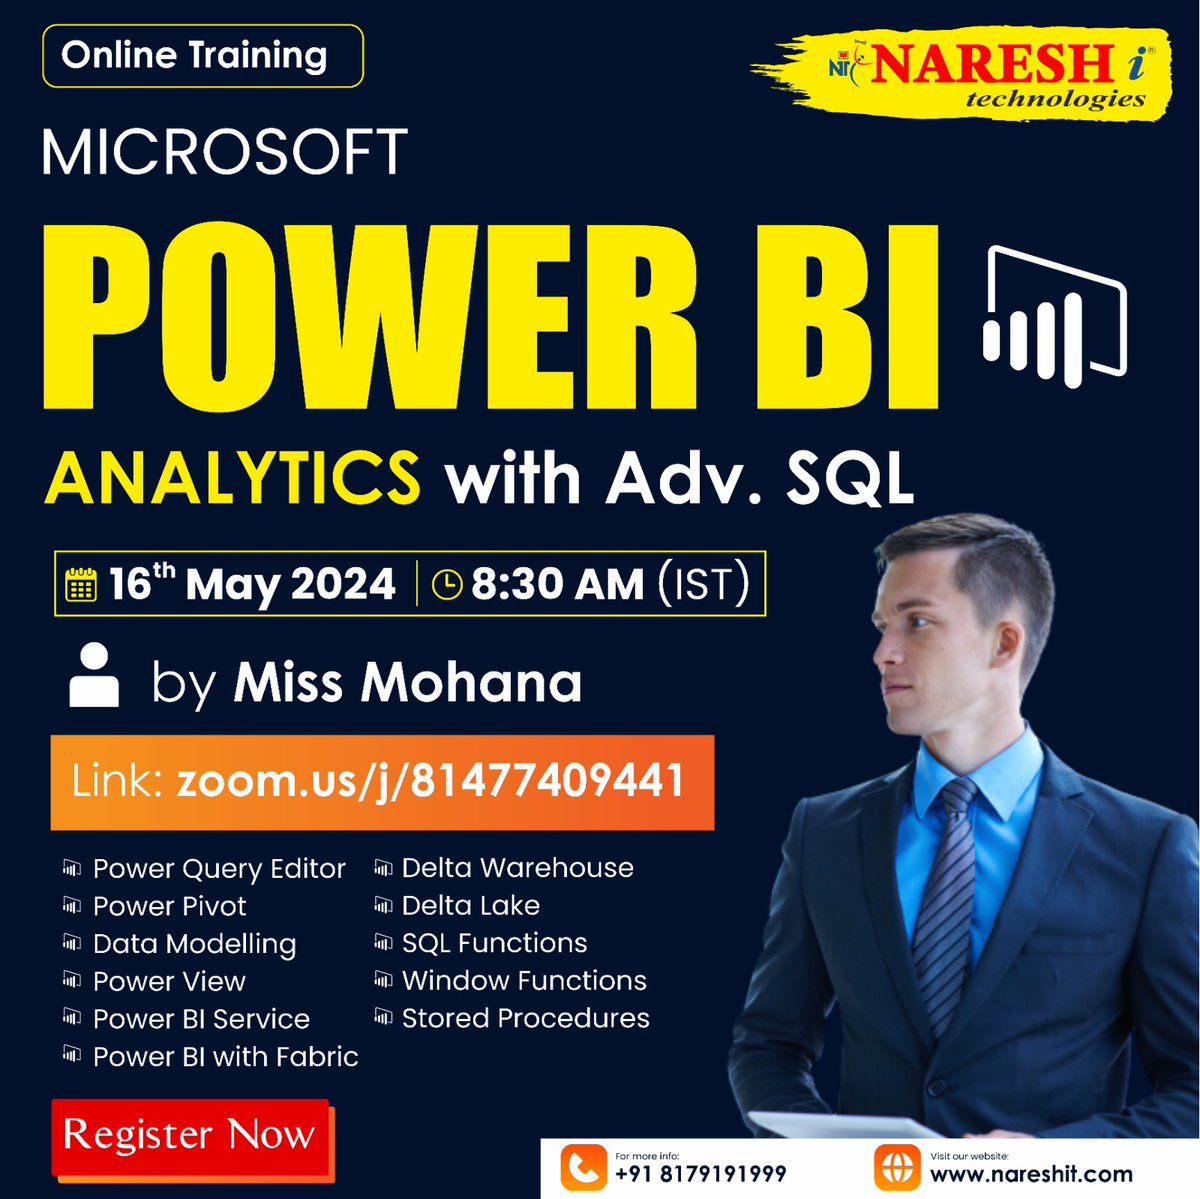 🛑 Free Demo 🛑
✍️Enroll Now: bit.ly/3WxNr2Z
👉Attend Free Demo On Power BI by Miss.Mohana.
📅Demo On: 16th may @ 8:30 AM (IST)

#Powerbi #sqlserver #cloud #learning #onlinetraining #education #software #learnfromhome #nareshit